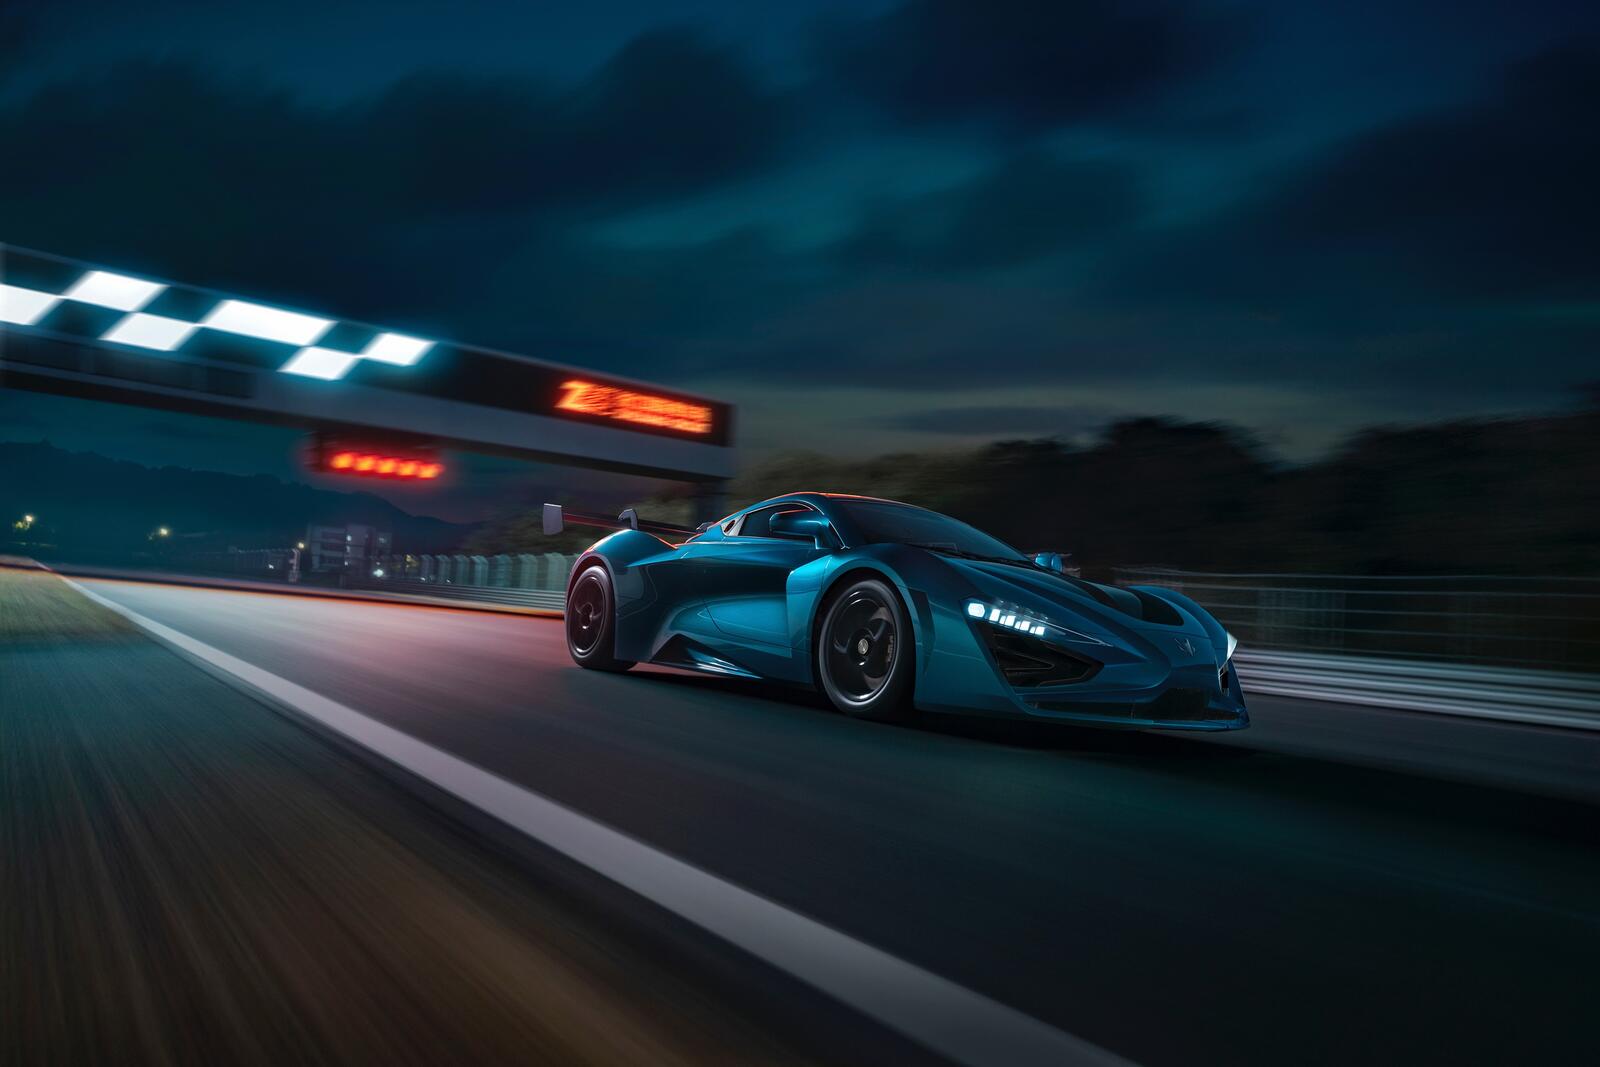 Wallpapers arcfox gt track cars 2020 year on the desktop